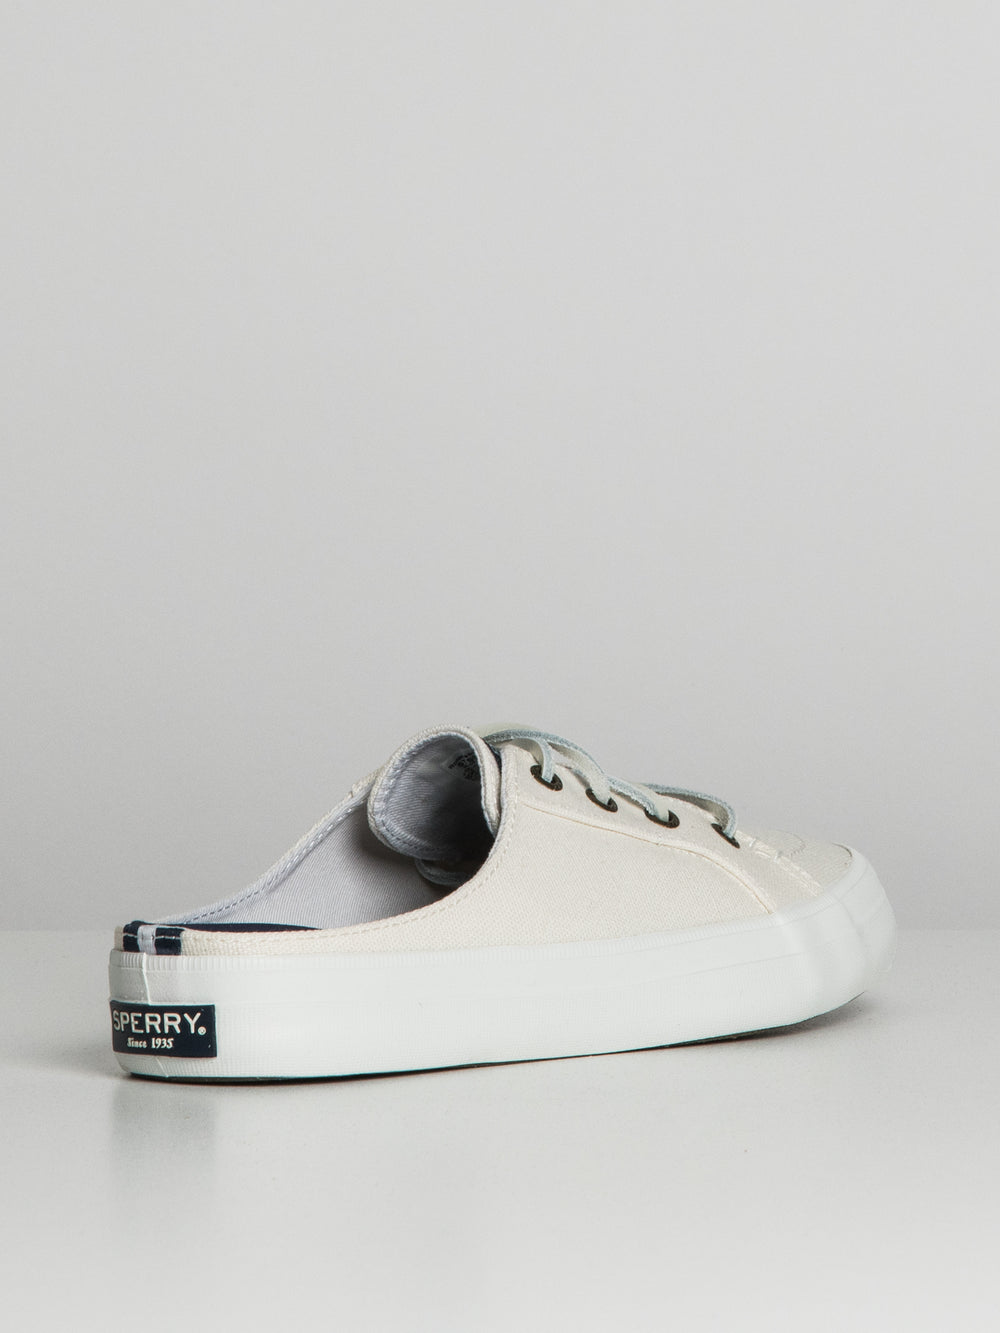 WOMENS SPERRY CREST MULE CANVAS